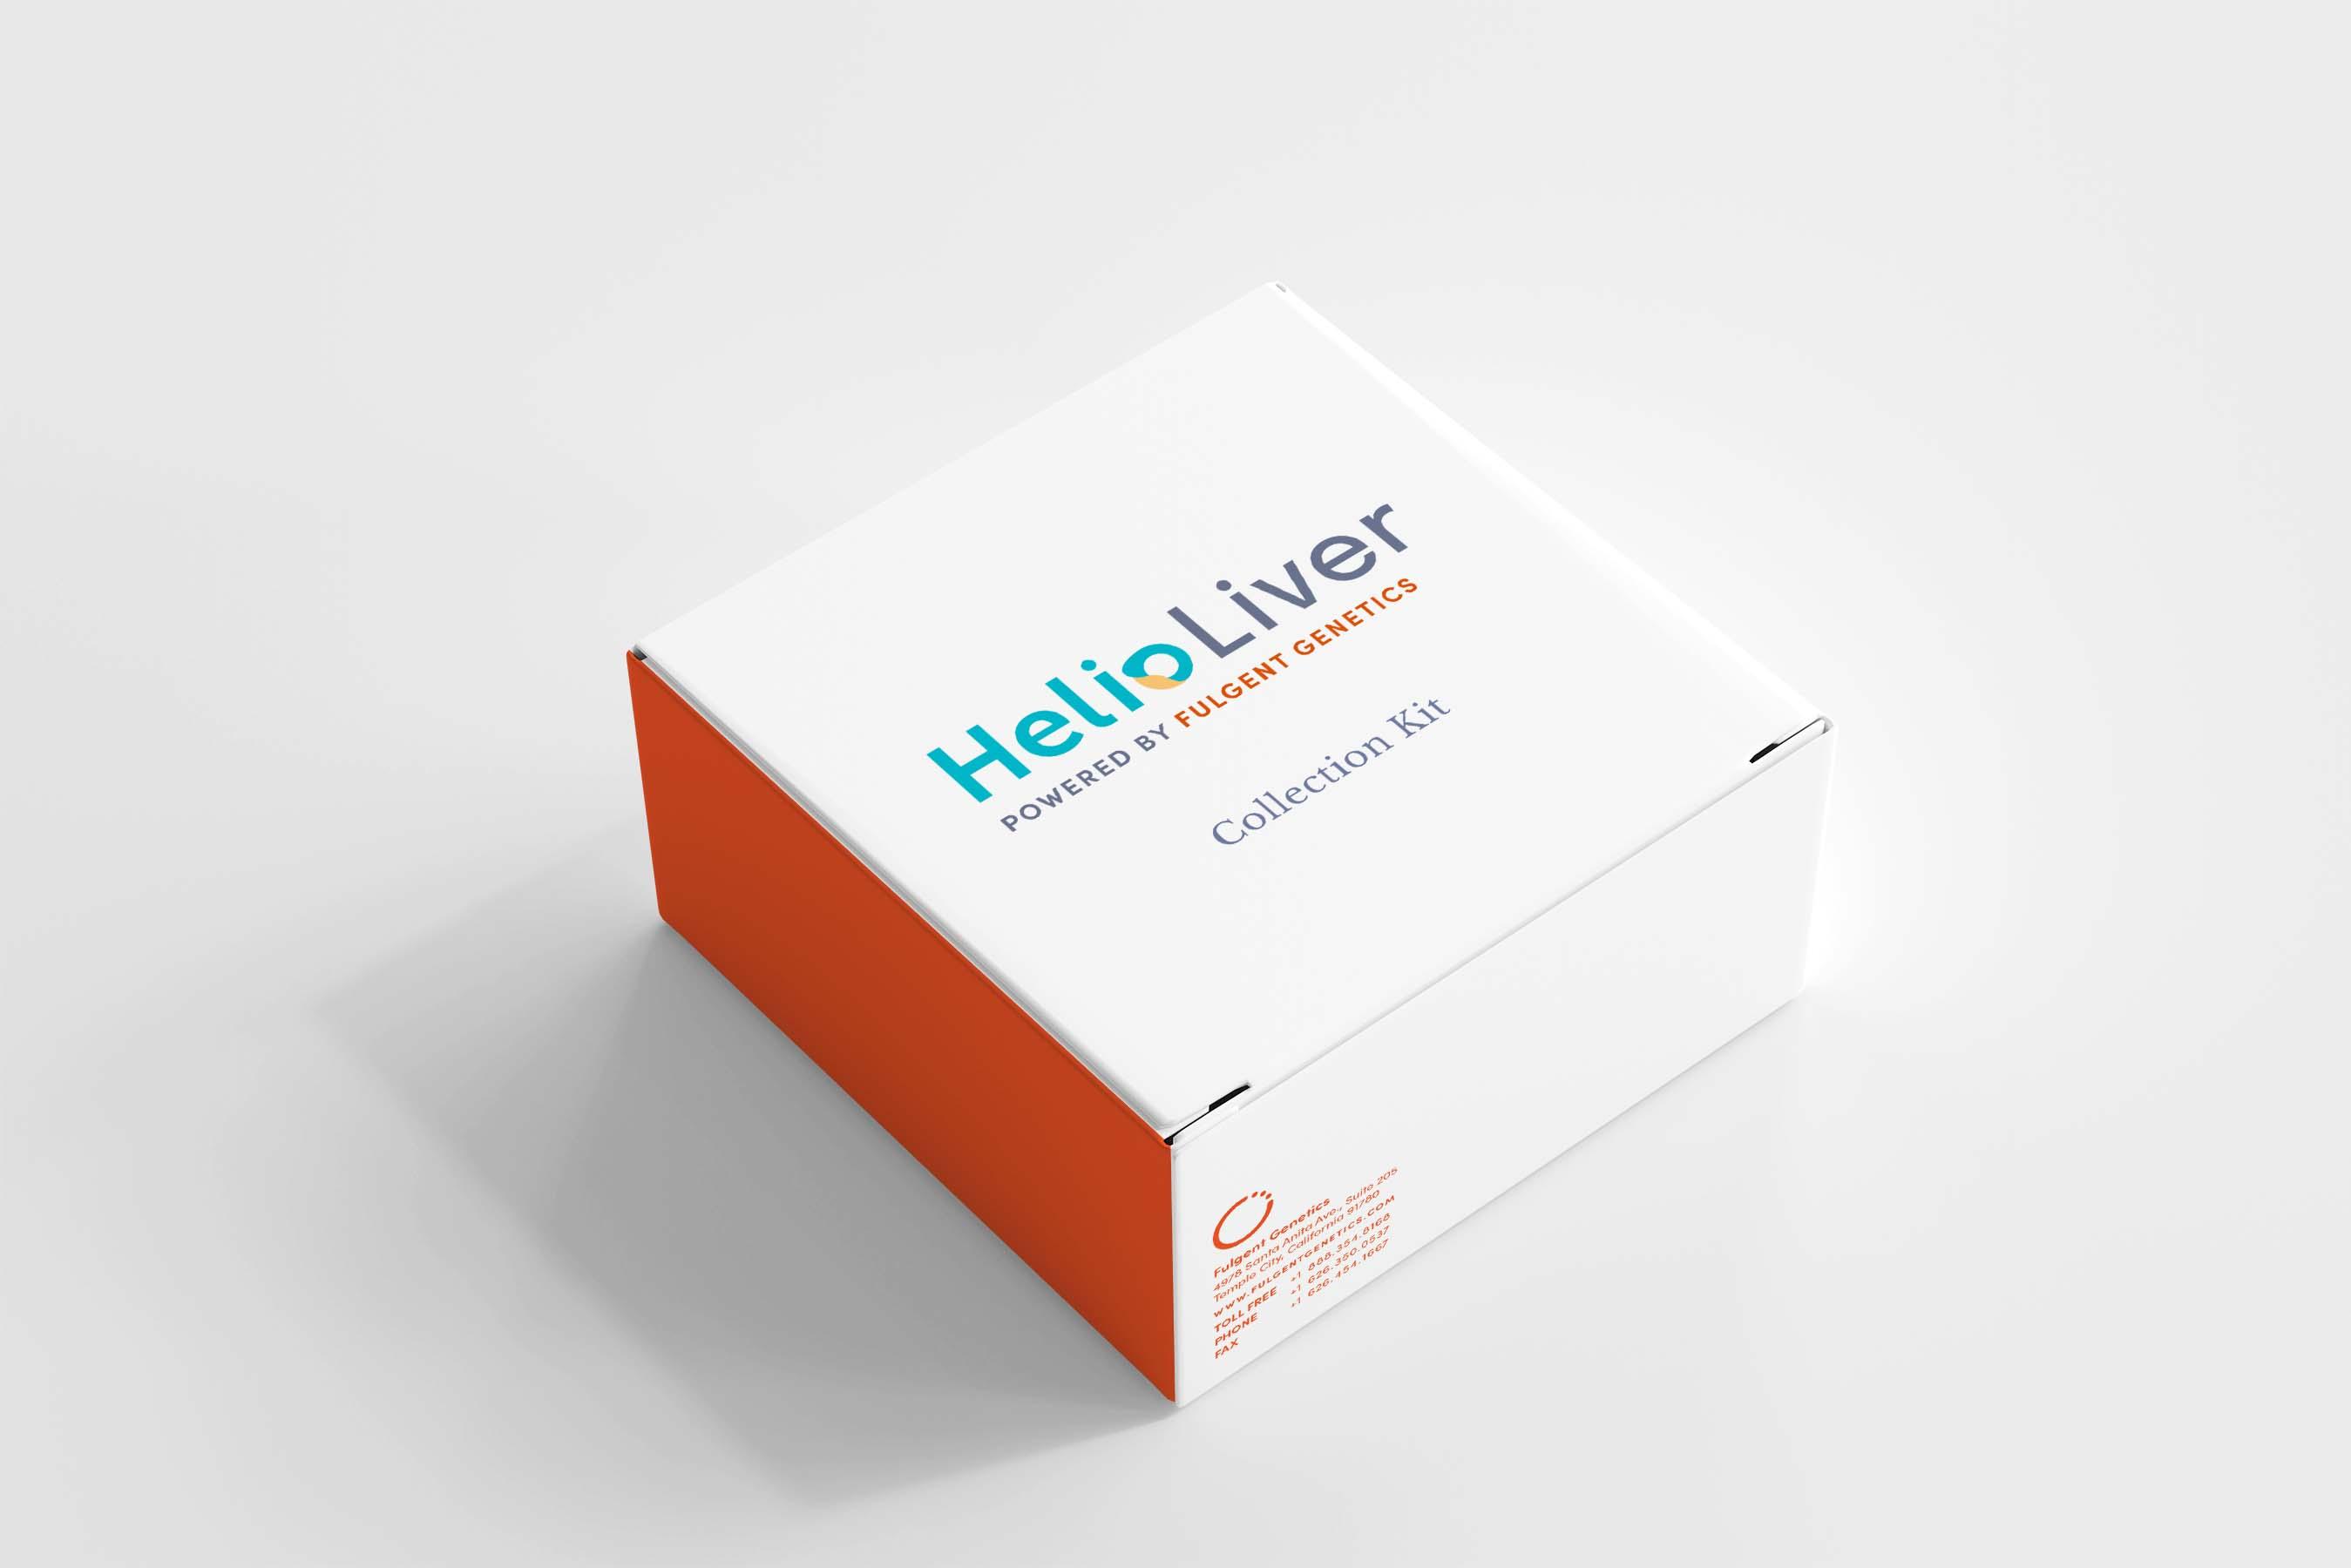 Helio liver collection kit